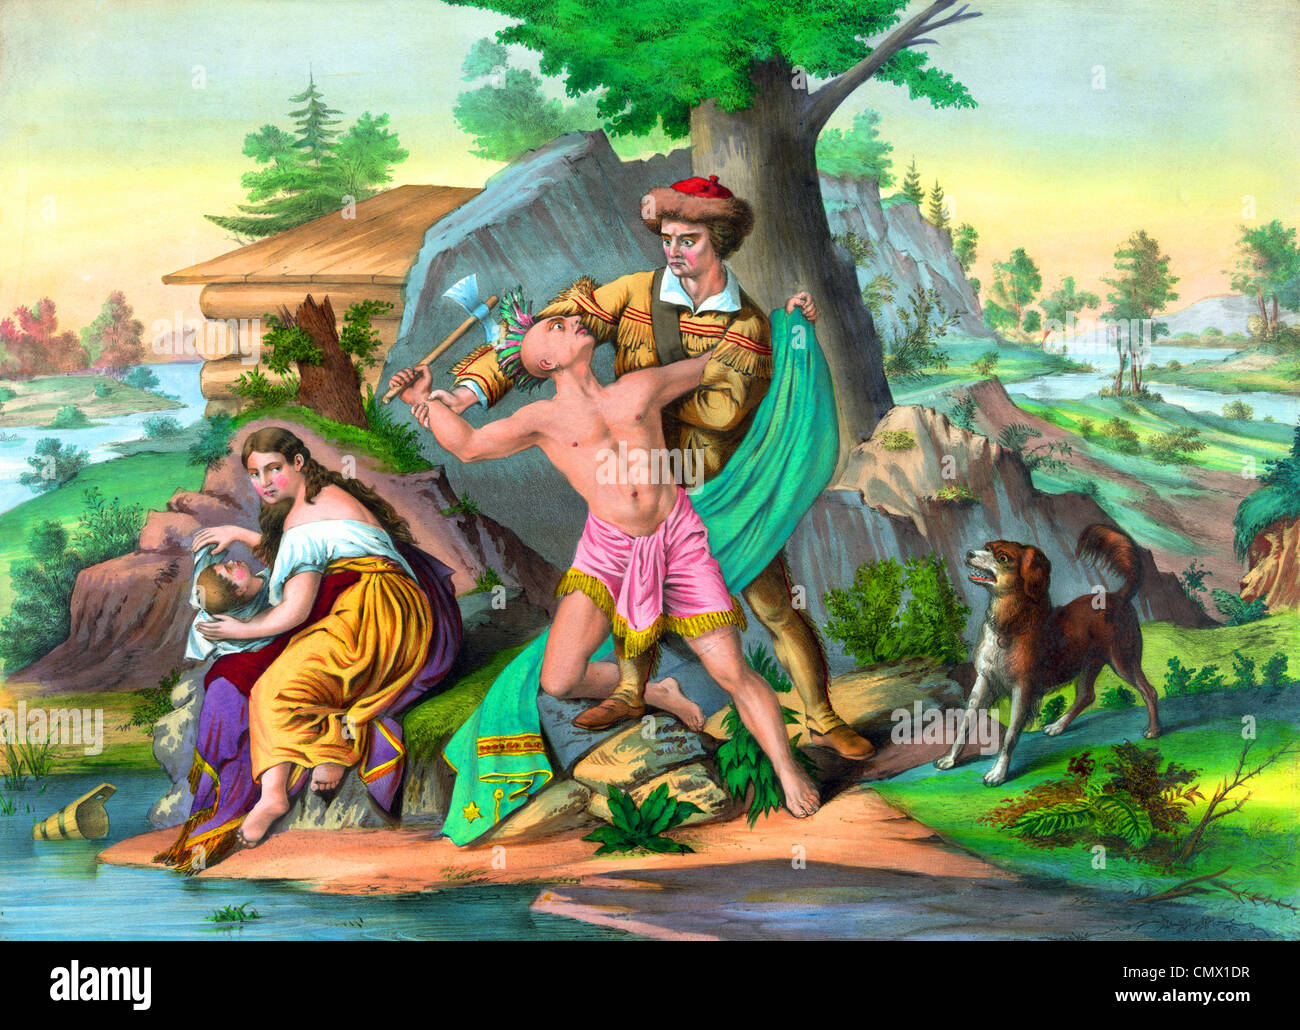 Vintage print depicting American frontiersman Daniel Boone (1734 - 1820) protecting his family from Indians. Stock Photo